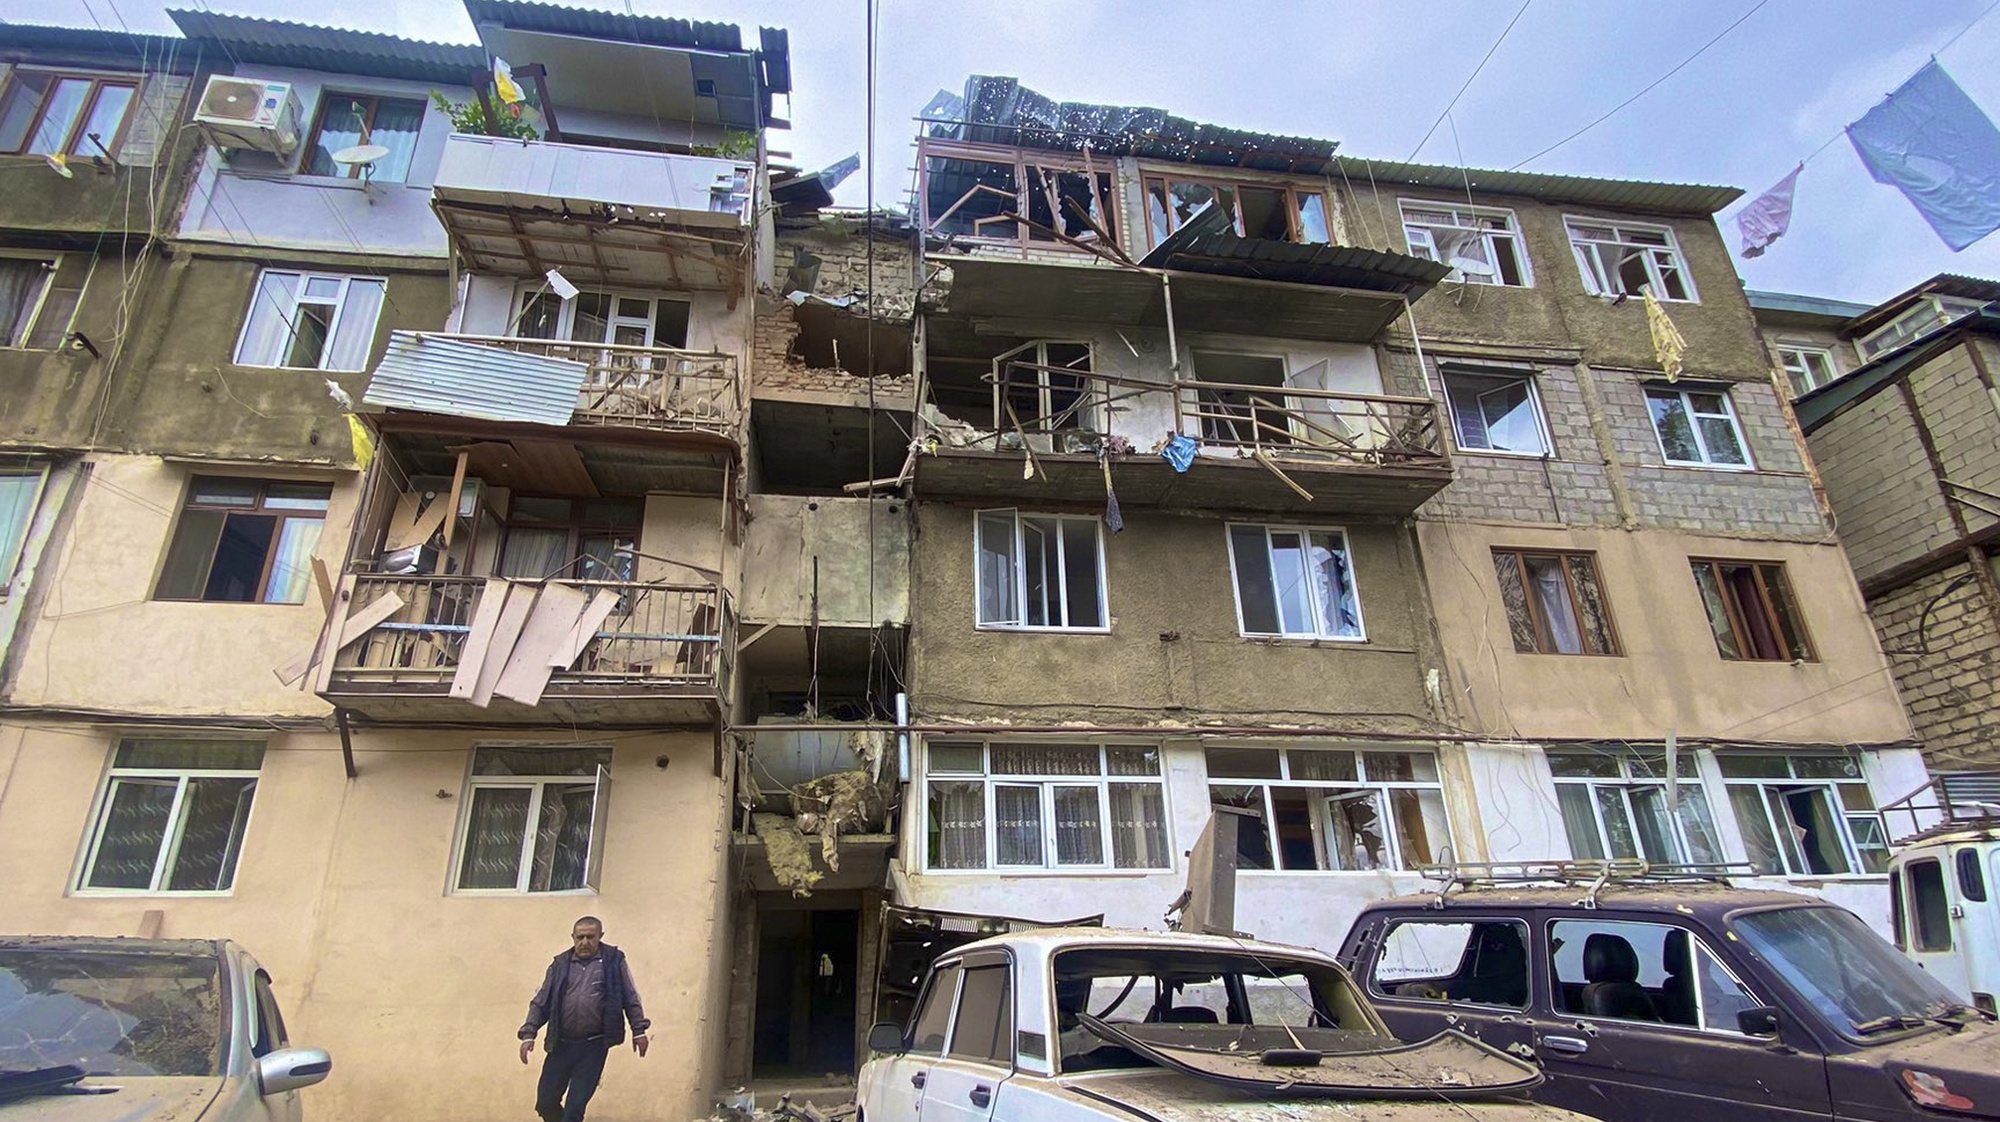 epa10869791 A handout photo made available by OC Media shows damage to residential buildings and vehicles in Stepnakert, Nagorno-Karabakh, 19 September 2023. Azerbaijan&#039;s Ministry of Defense announced on 19 September the launching of local &#039;anti-terrorism&#039; measures against the Armenian military in the disputed Nagorno-Karabakh region in order to restore the constitutional order of Azerbaijan.  EPA/SARGSYAN/OC MEDIA HANDOUT HANDOUT EDITORIAL USE ONLY/NO SALES HANDOUT EDITORIAL USE ONLY/NO SALES